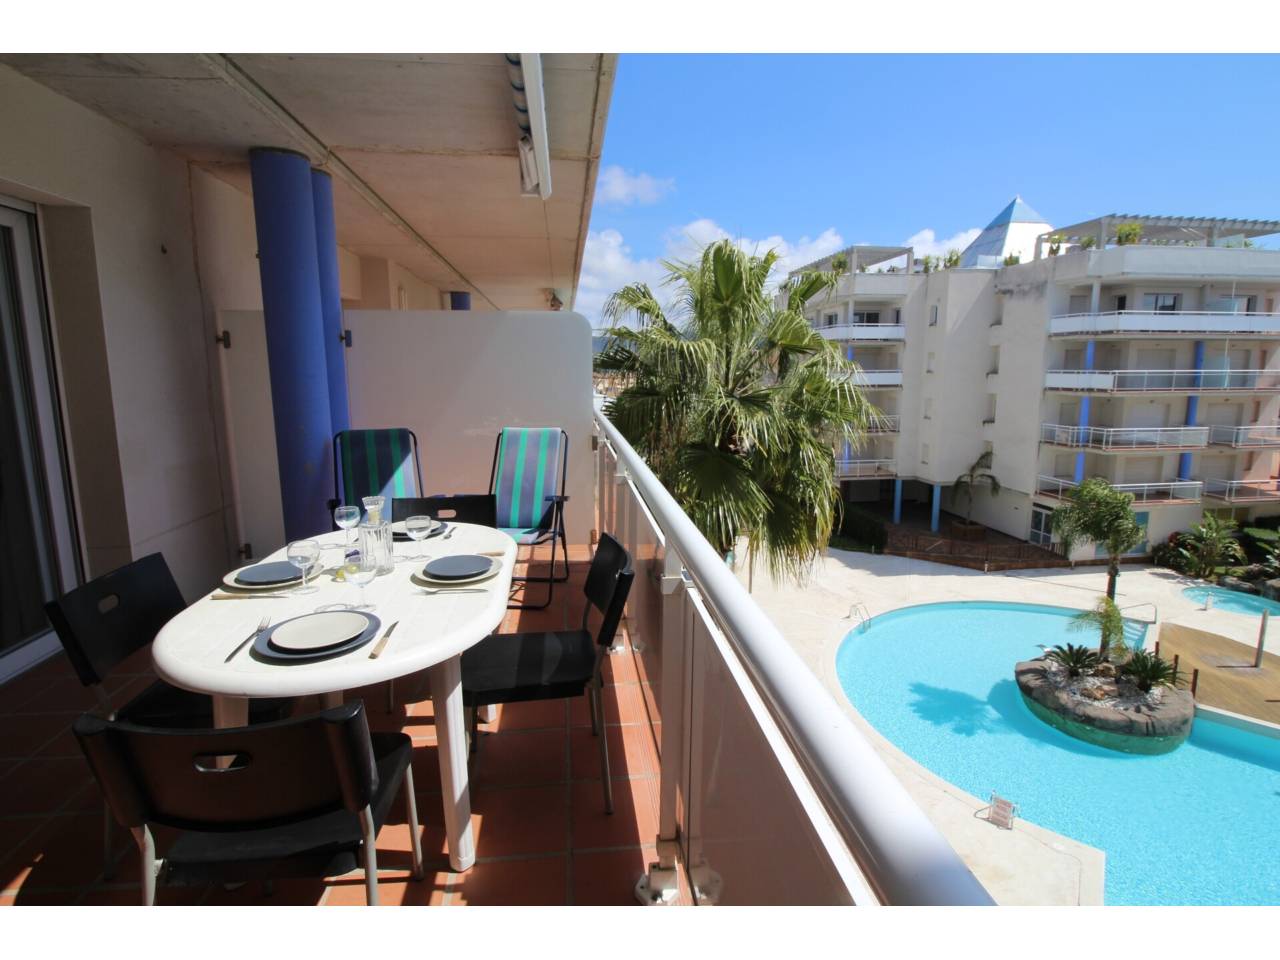 000005 - PORT CANIGÓ Apartment with communal swimming pools and gardens in Santa Margarita